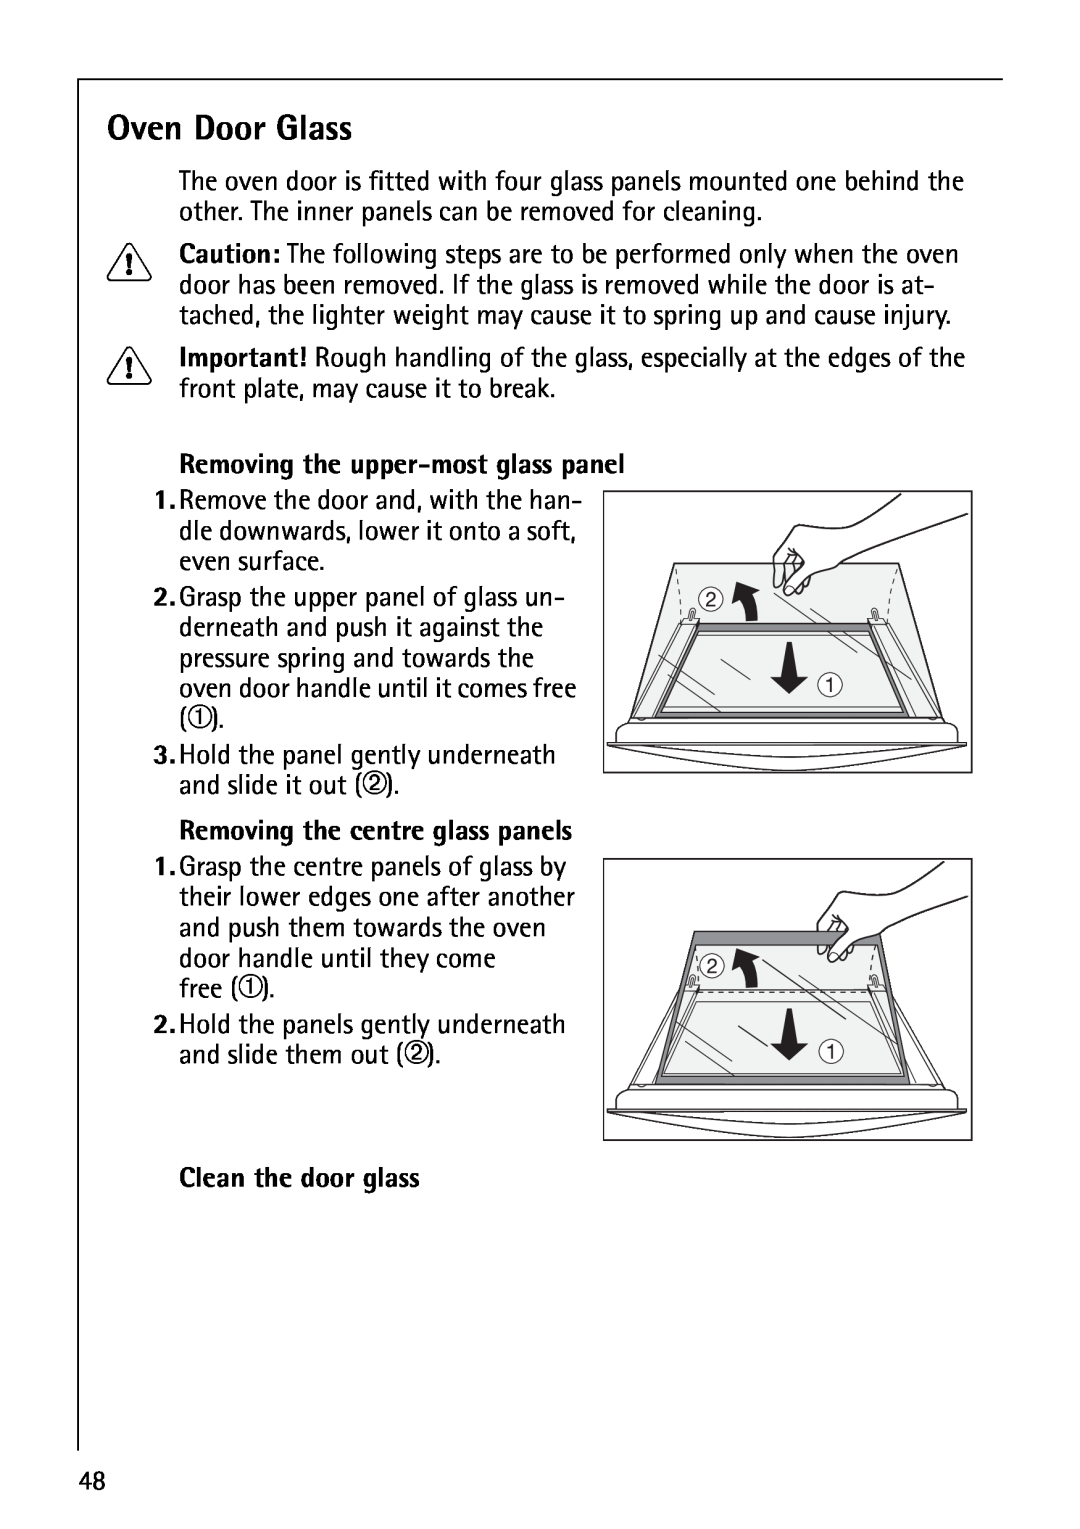 Electrolux B5741-4 manual Oven Door Glass, Removing the upper-most glass panel, Removing the centre glass panels 